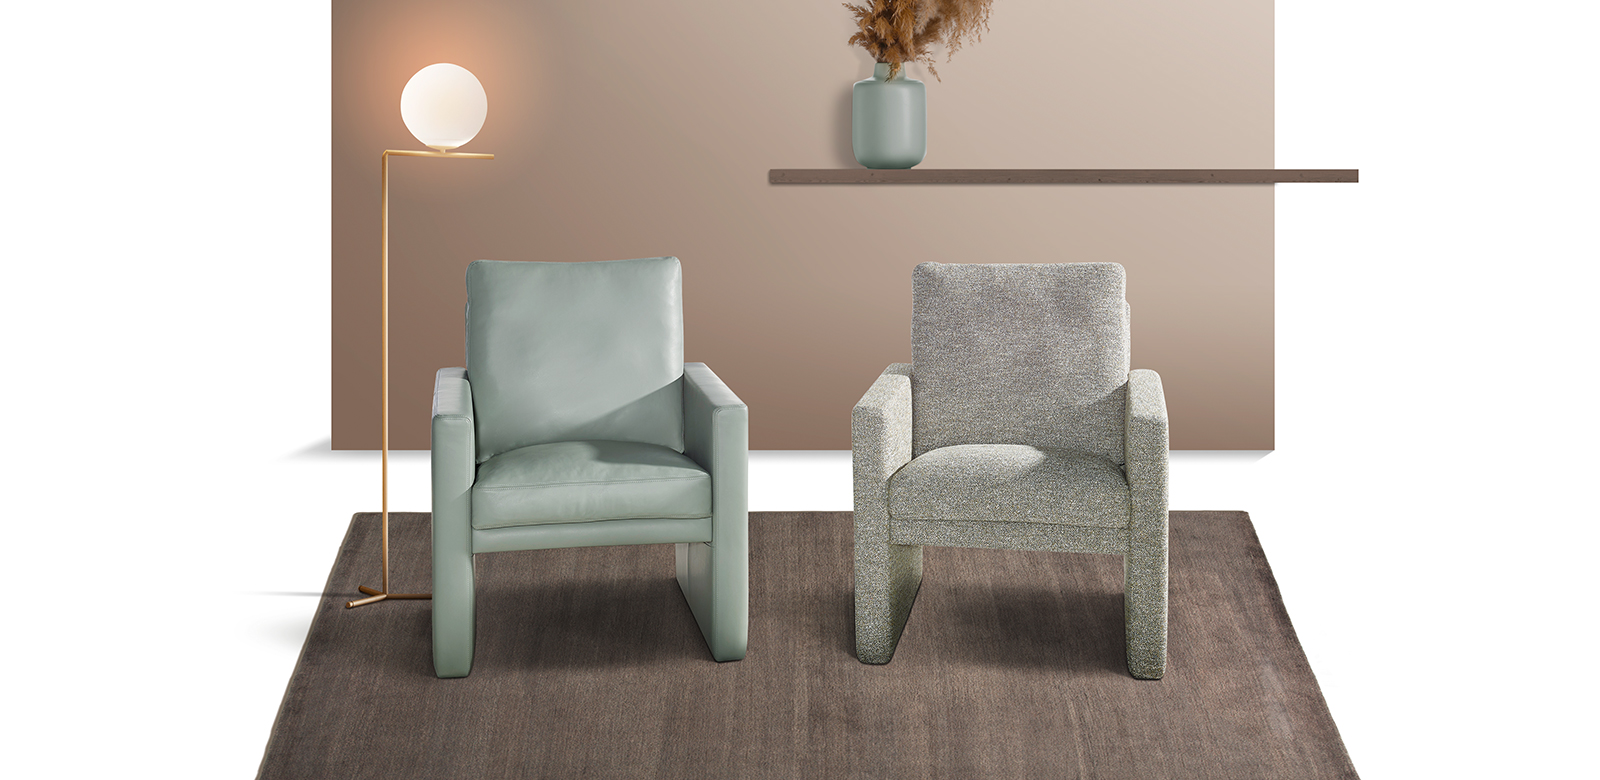 This chic piece of seating furniture convinces with its visual clarity and its timeless, simple design, which adds that certain something to any interior and can be placed anywhere thanks to its small cubic shape. The narrow cheeks provide you with the desired comfort.